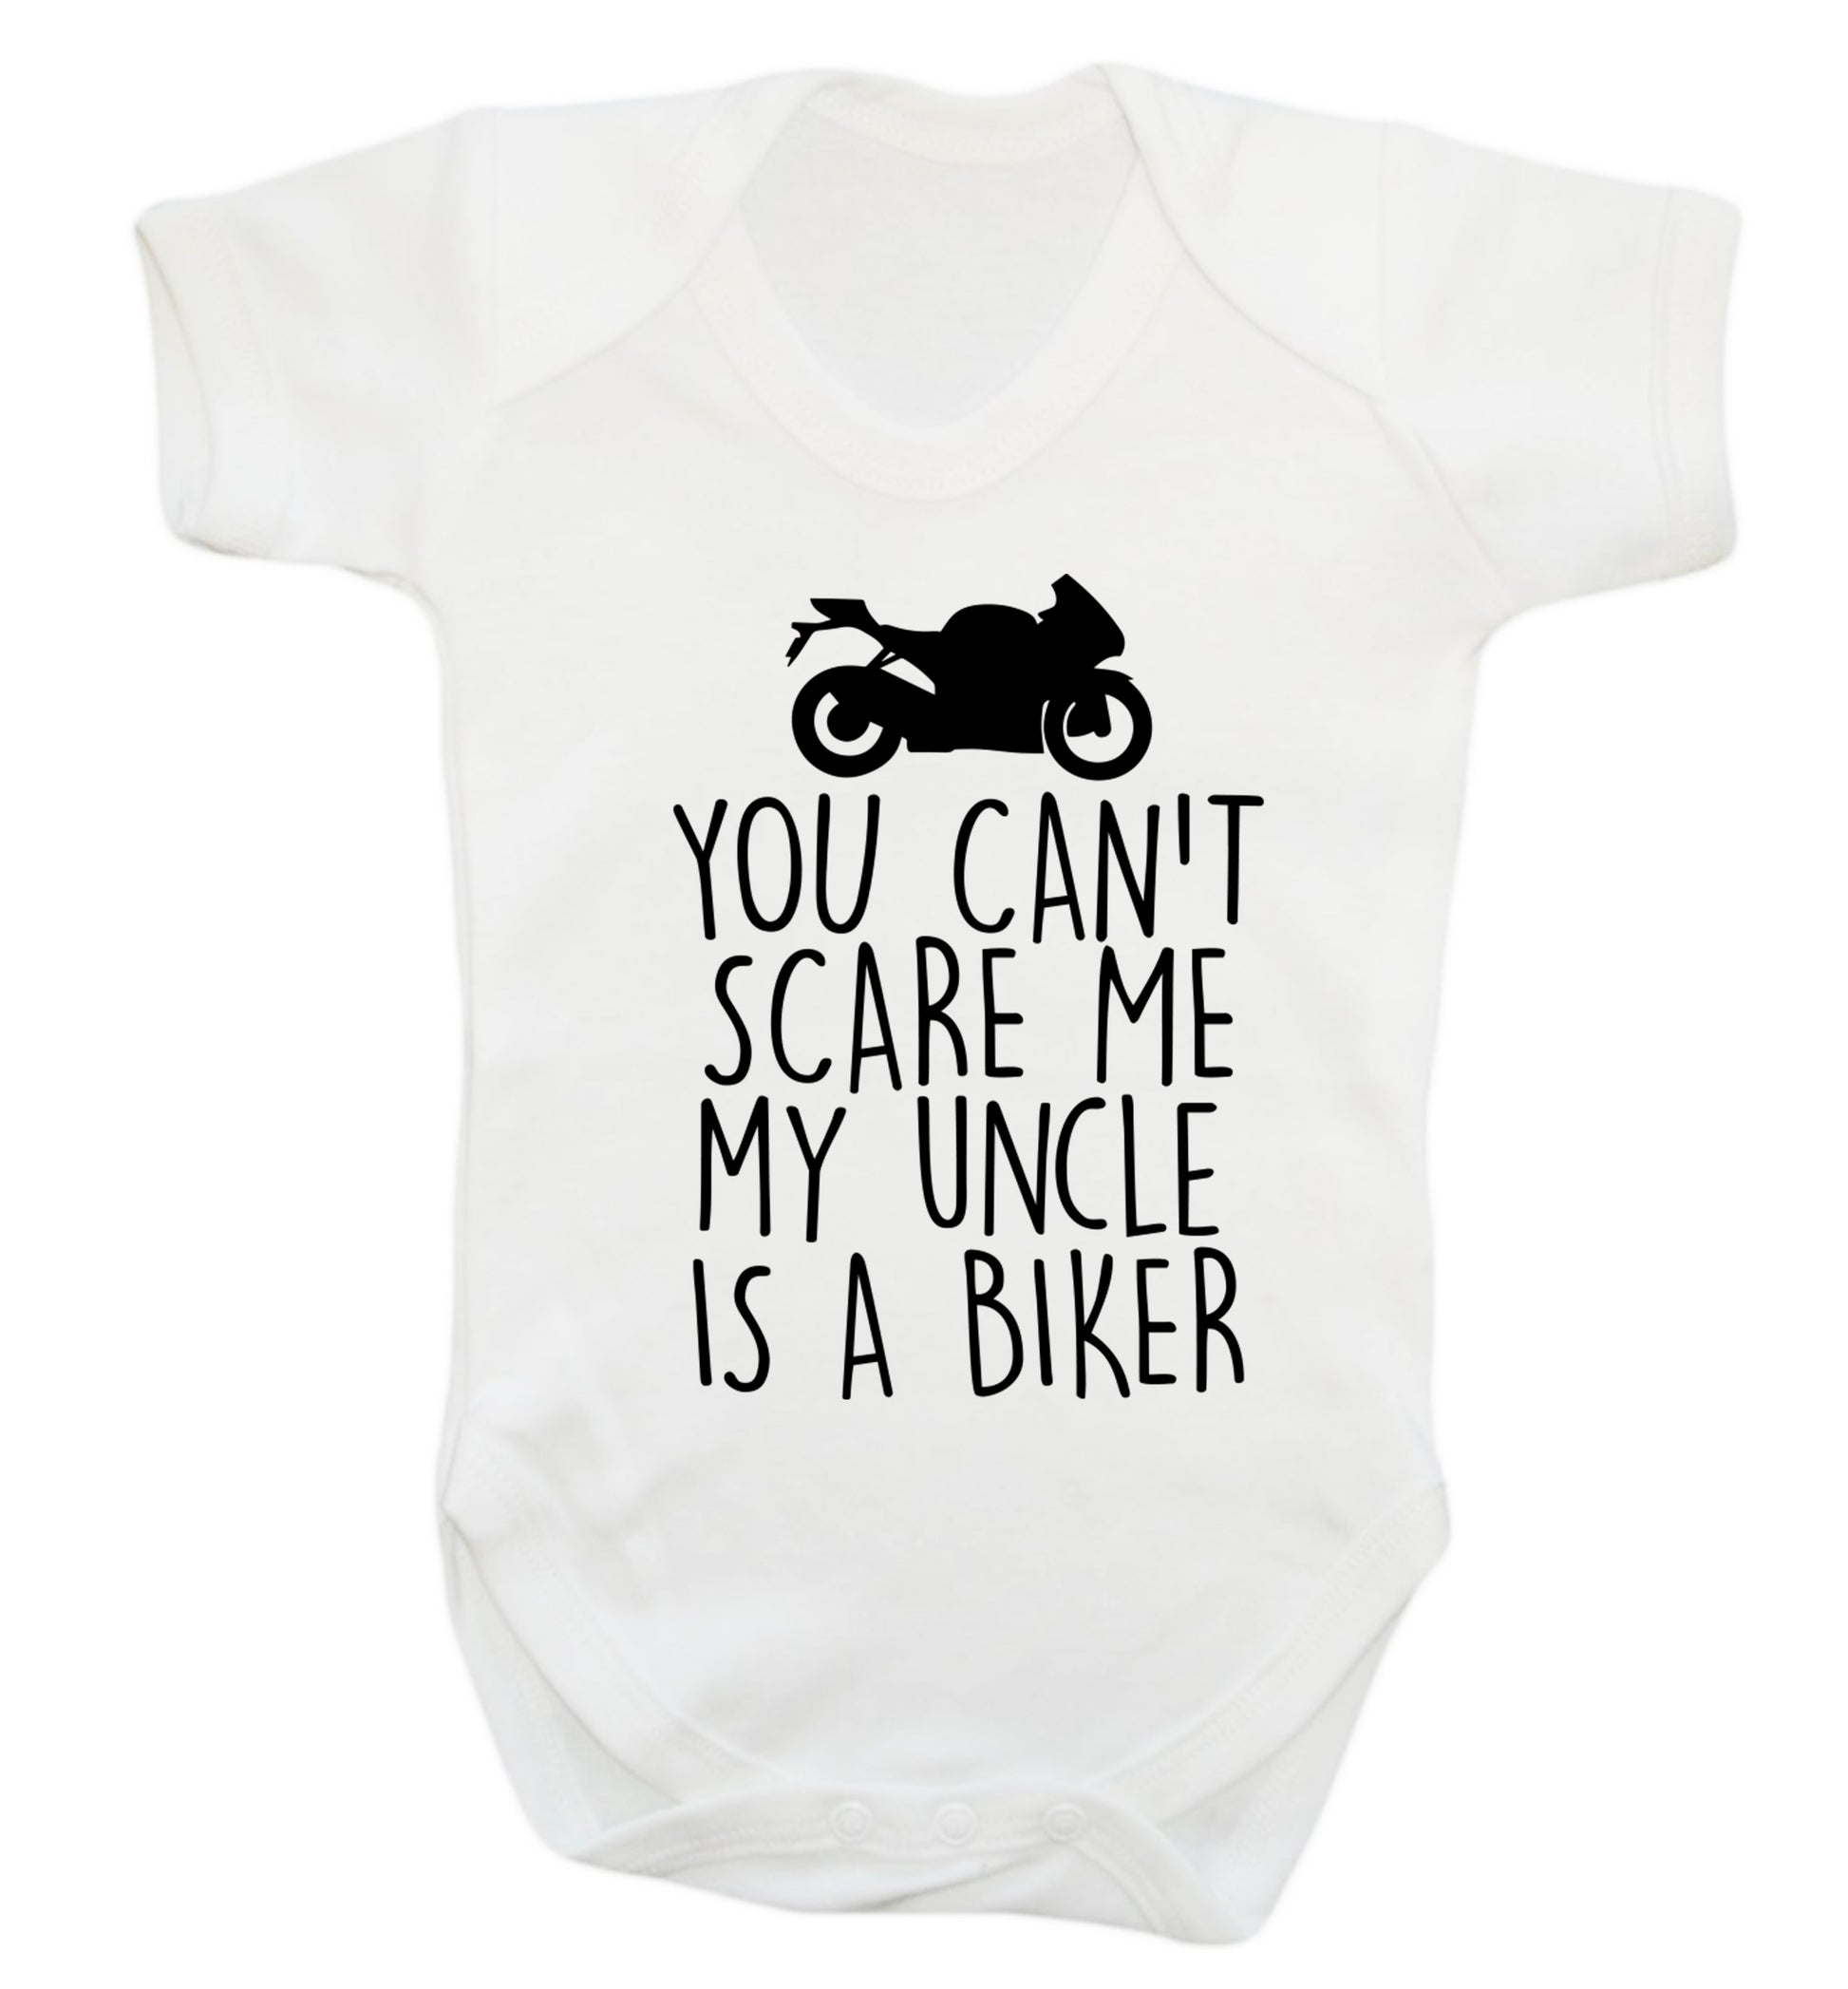 You can't scare me my uncle is a biker Baby Vest white 18-24 months